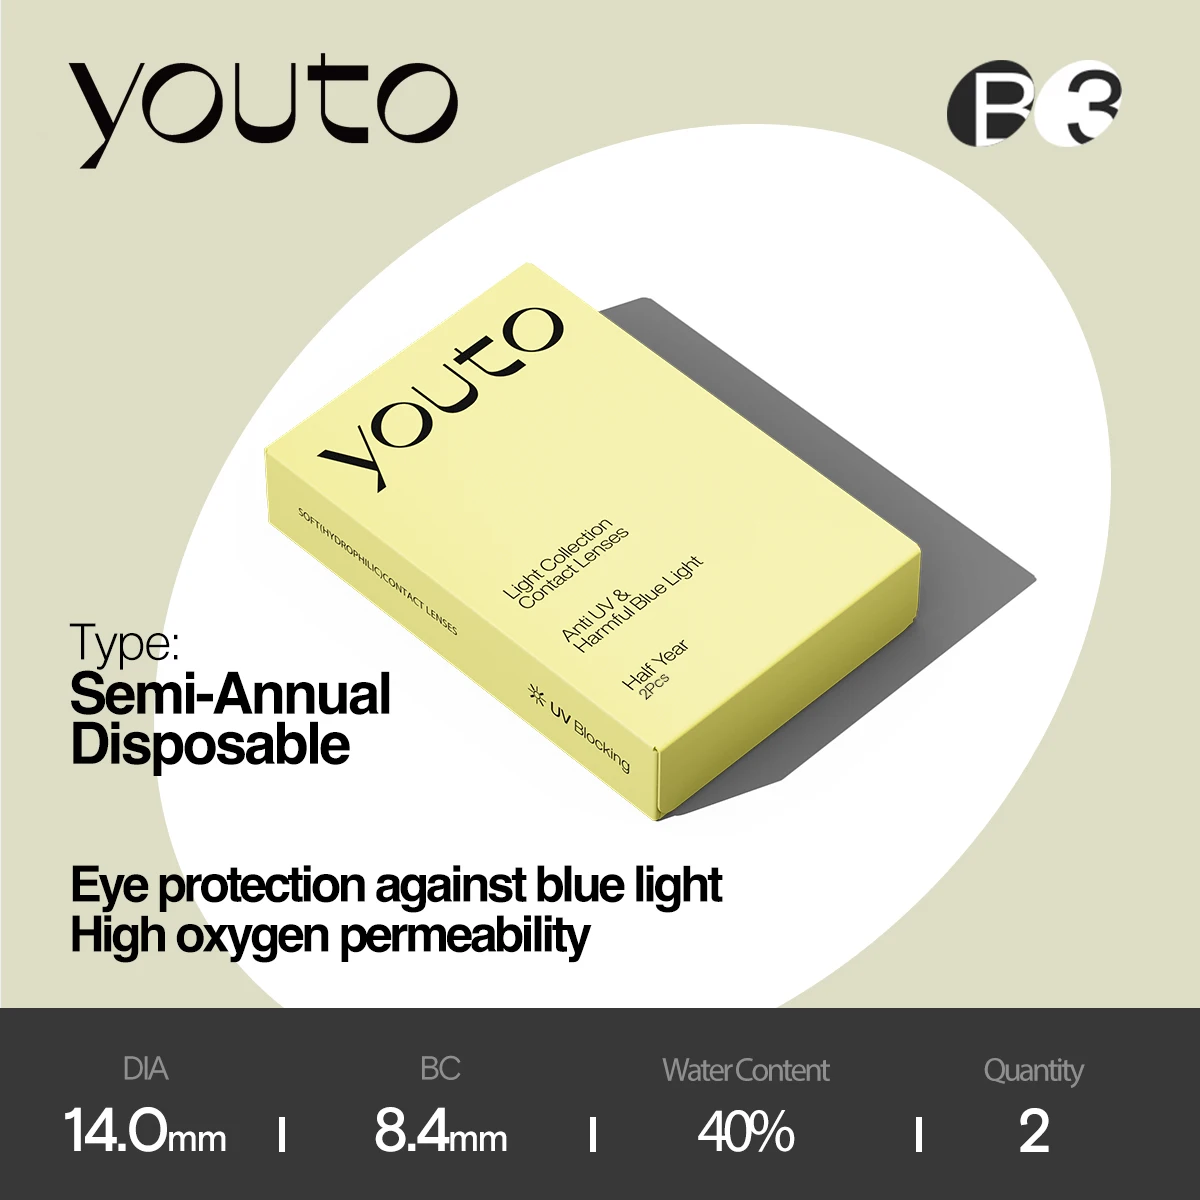 

Youto Light 6-Month Soft Contact Lenses, BC 8.4 mm, DIA 14.0 mm, 40% Moisture, Contact Lenses that Reduce Retinal Blue Light